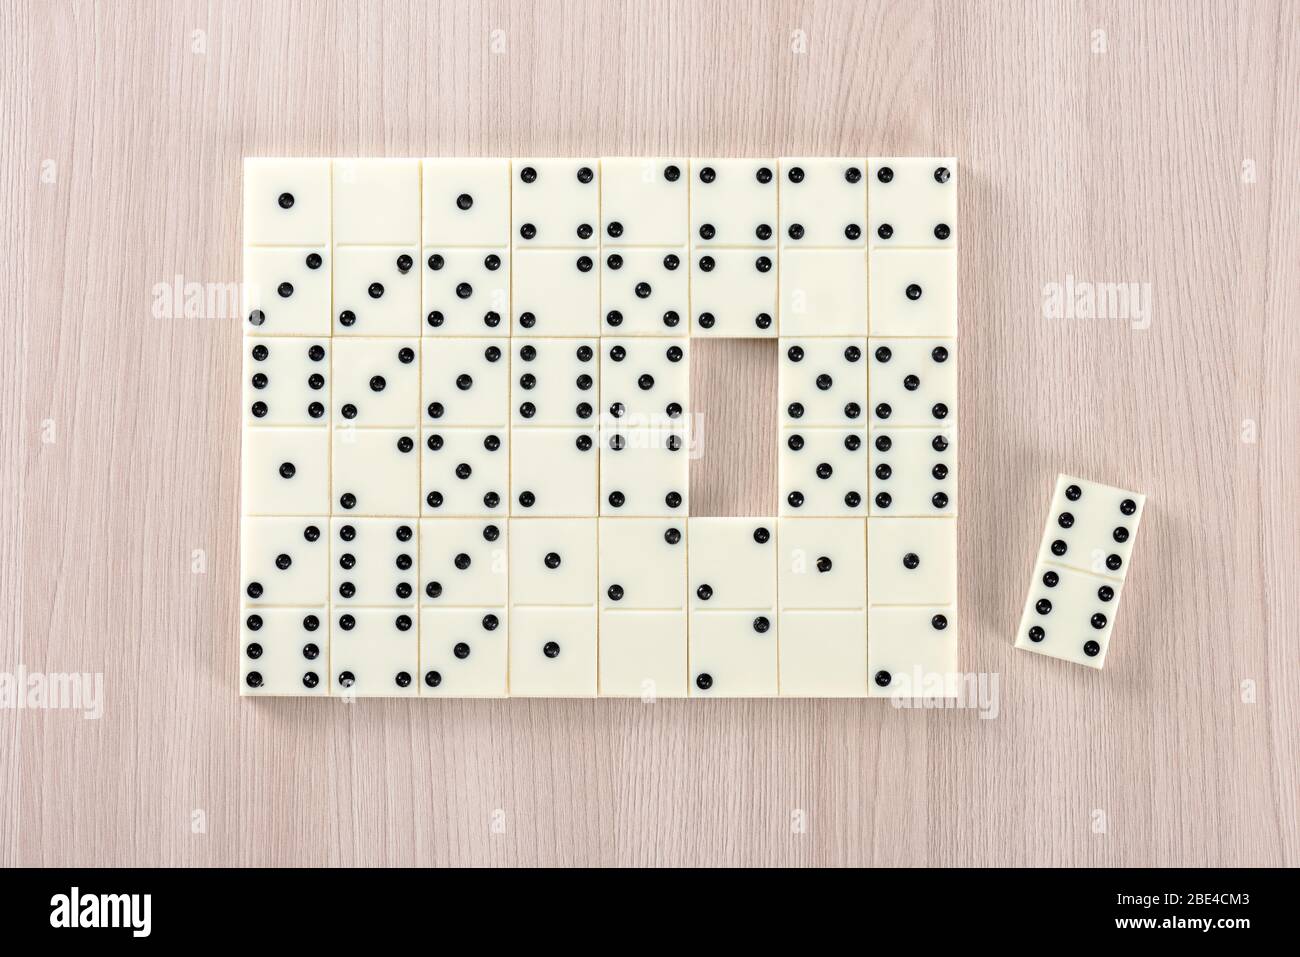 Playing dominoes on a wooden table Stock Photo